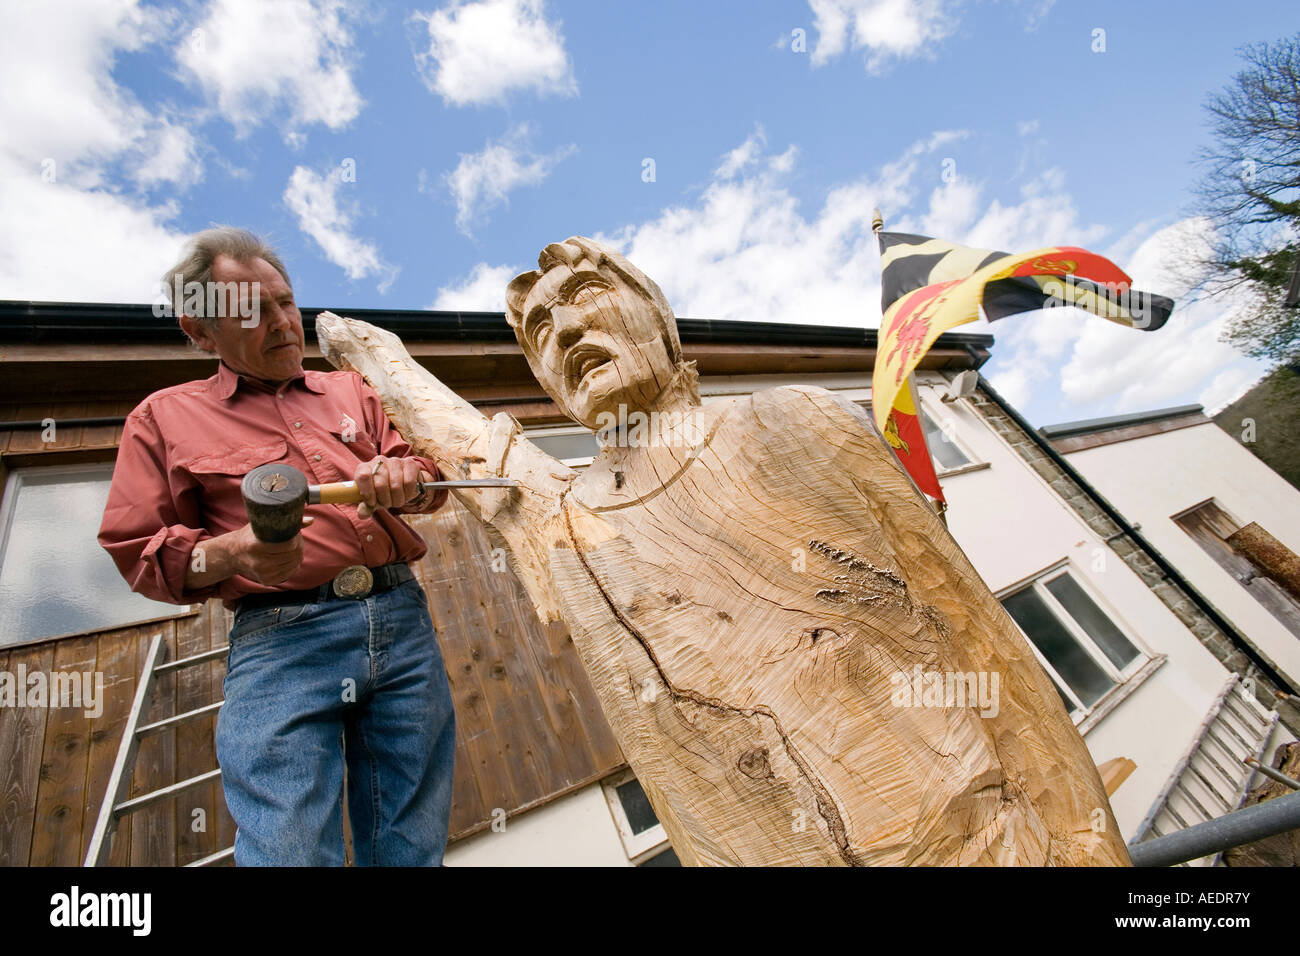 UK Wales Powys Builth Wells sculptor David Willams shaping Owain Glyndwr statue with flag behind Stock Photo